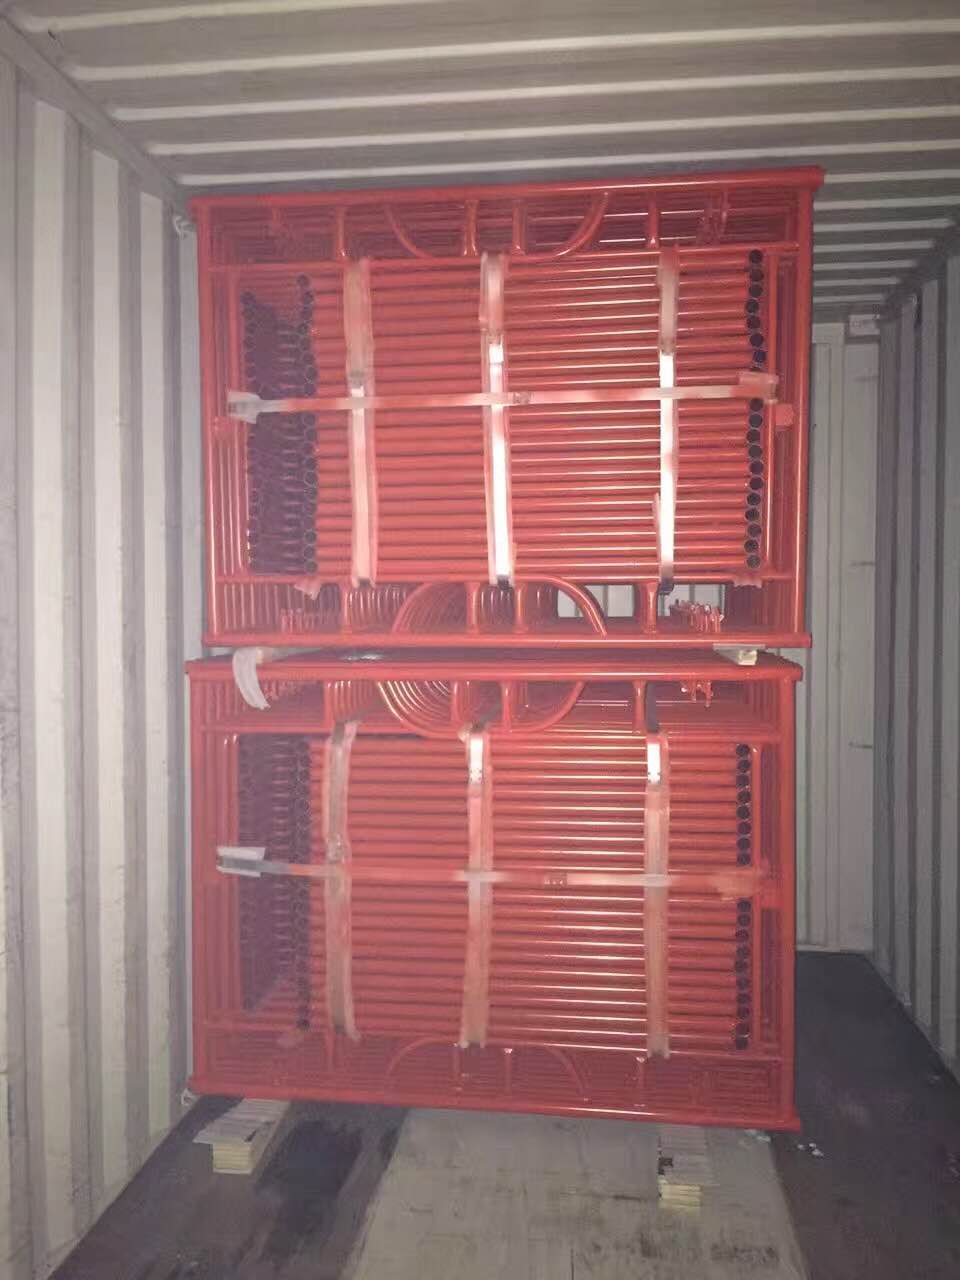 h frame in container